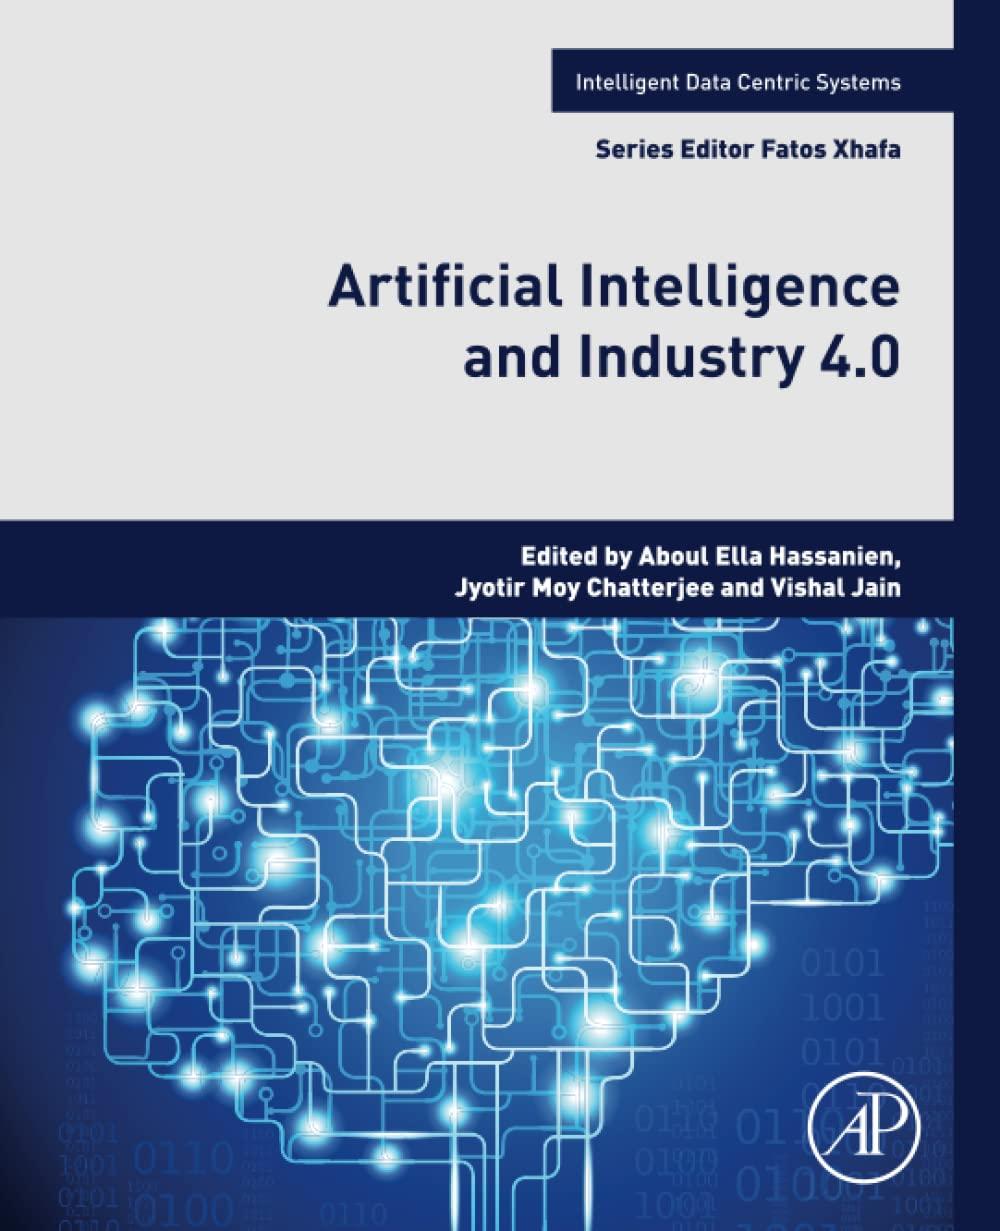 artificial intelligence and industry 4.0 1st edition aboul ella hassanien, jyotir moy chatterjee , vishal